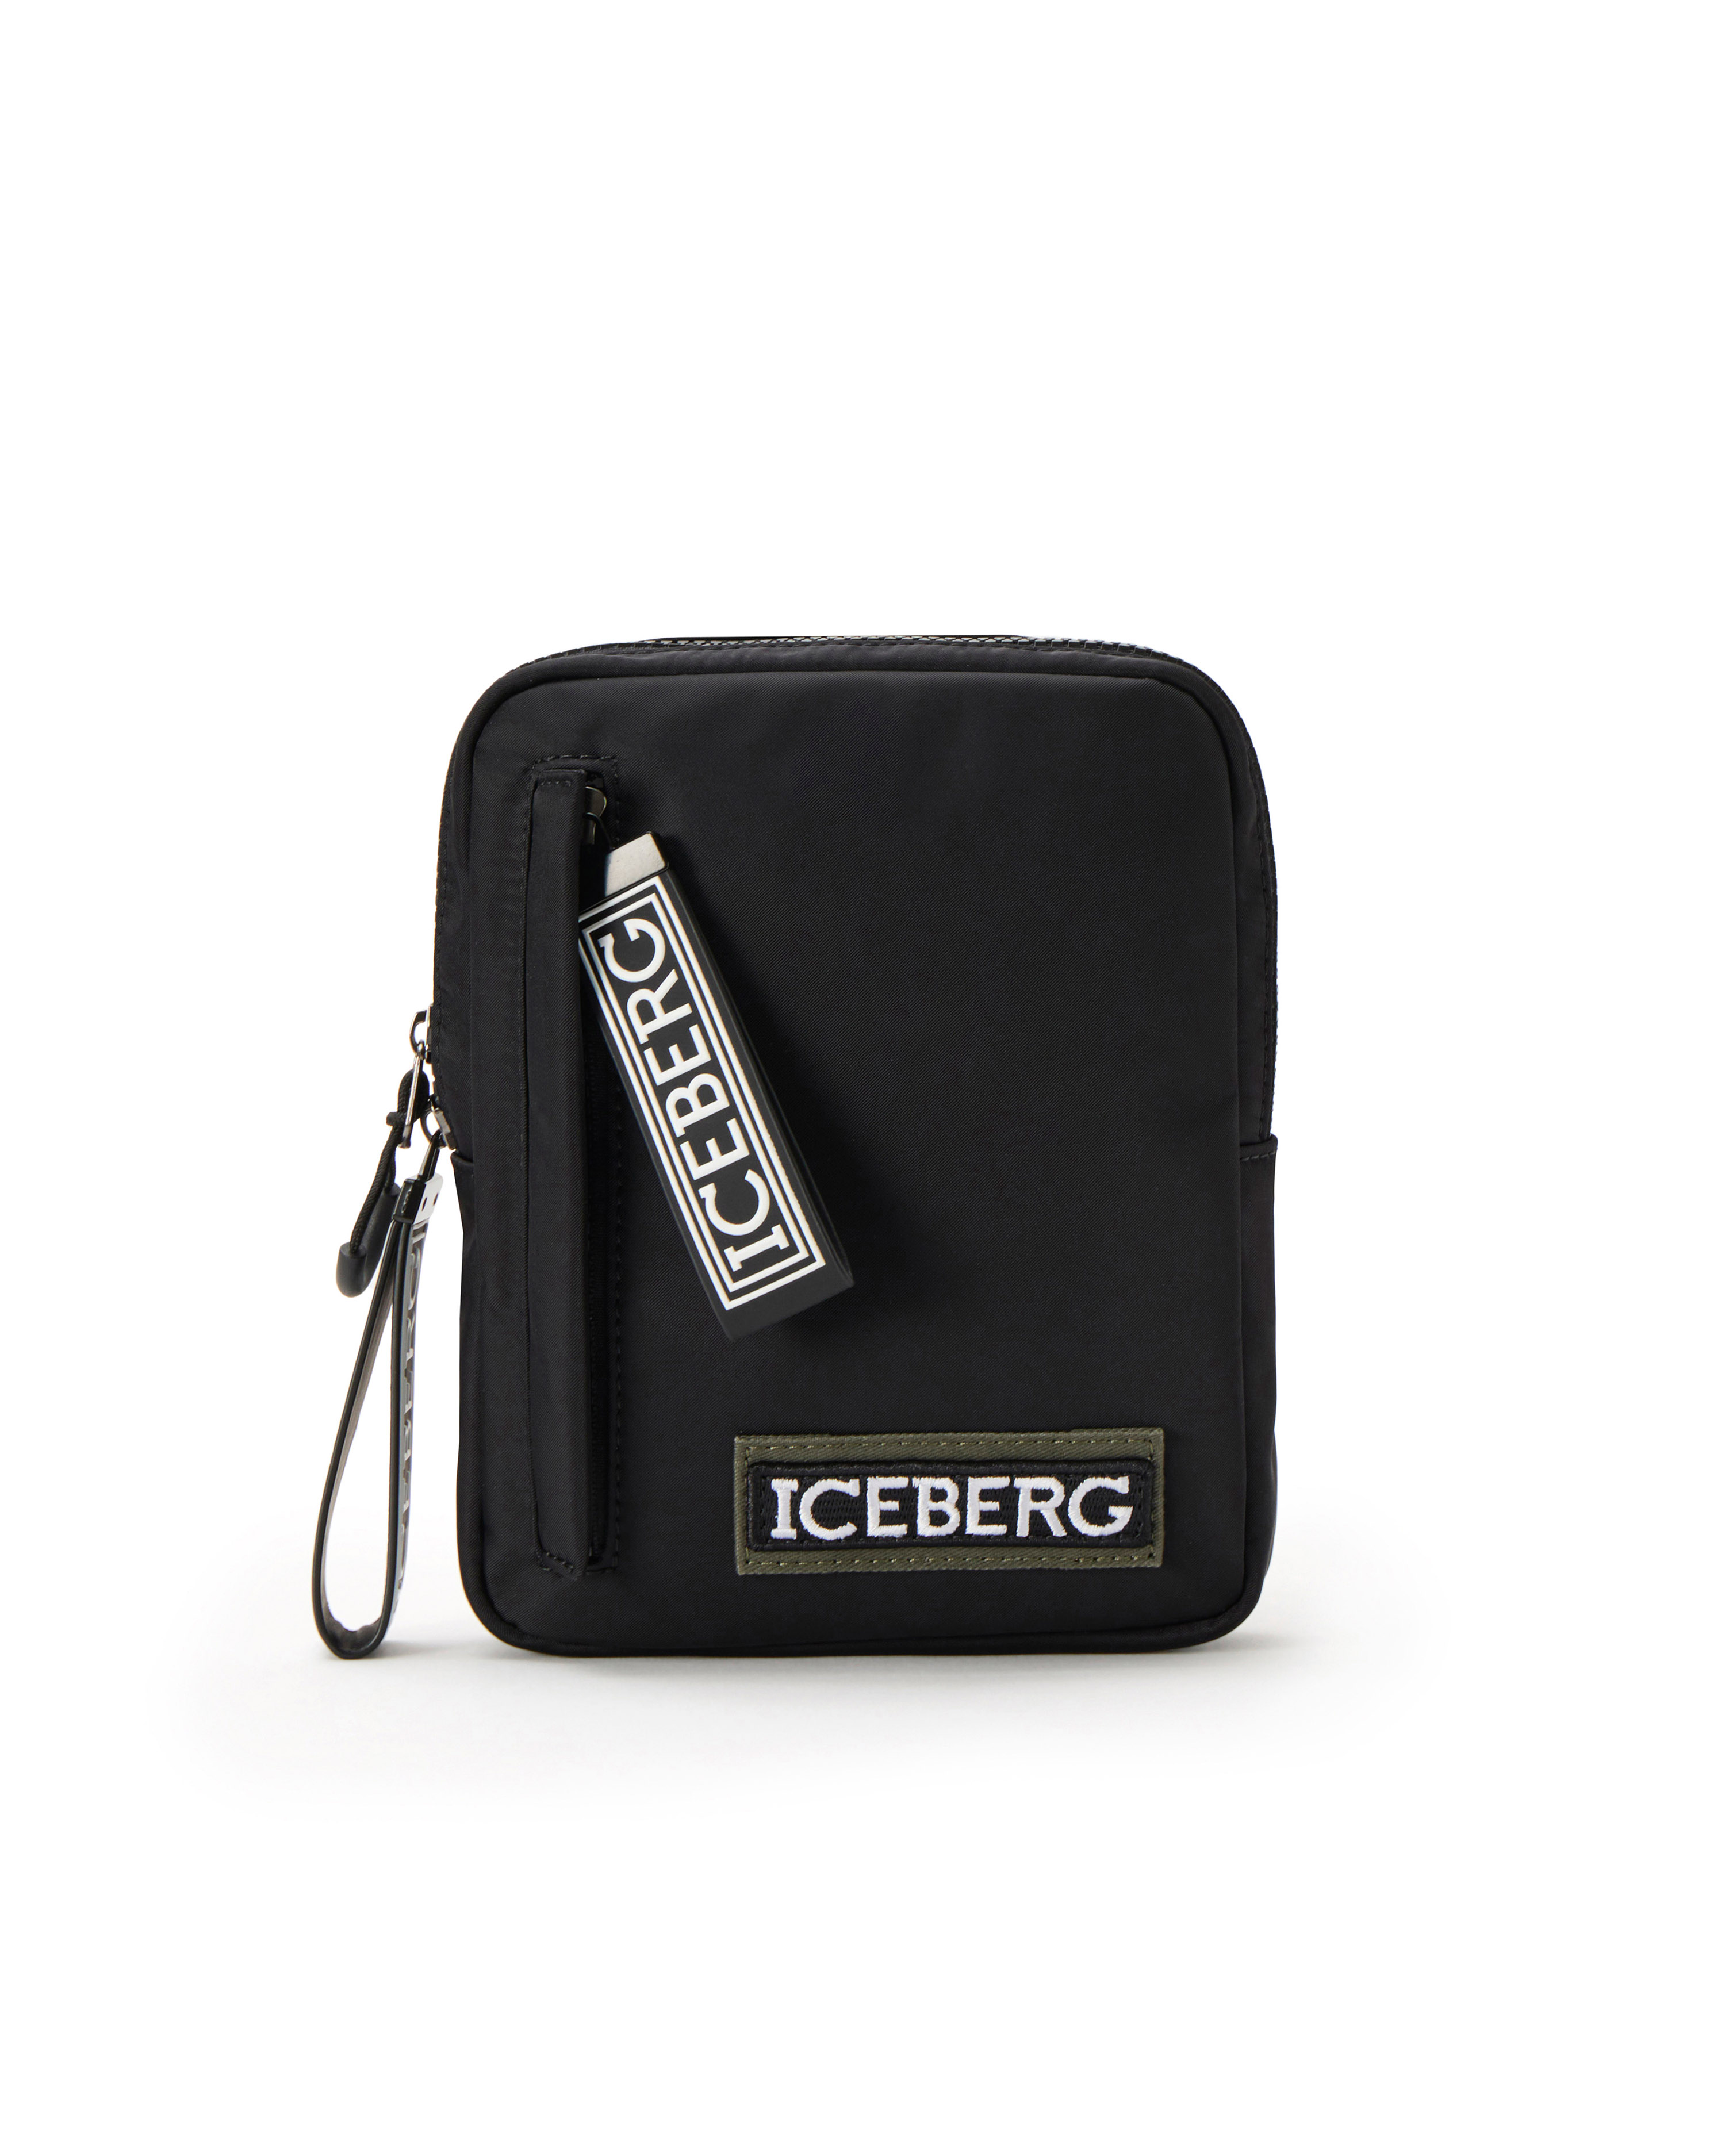 Phone pouch with institutional logo - carosello HP man accessories | Iceberg - Official Website